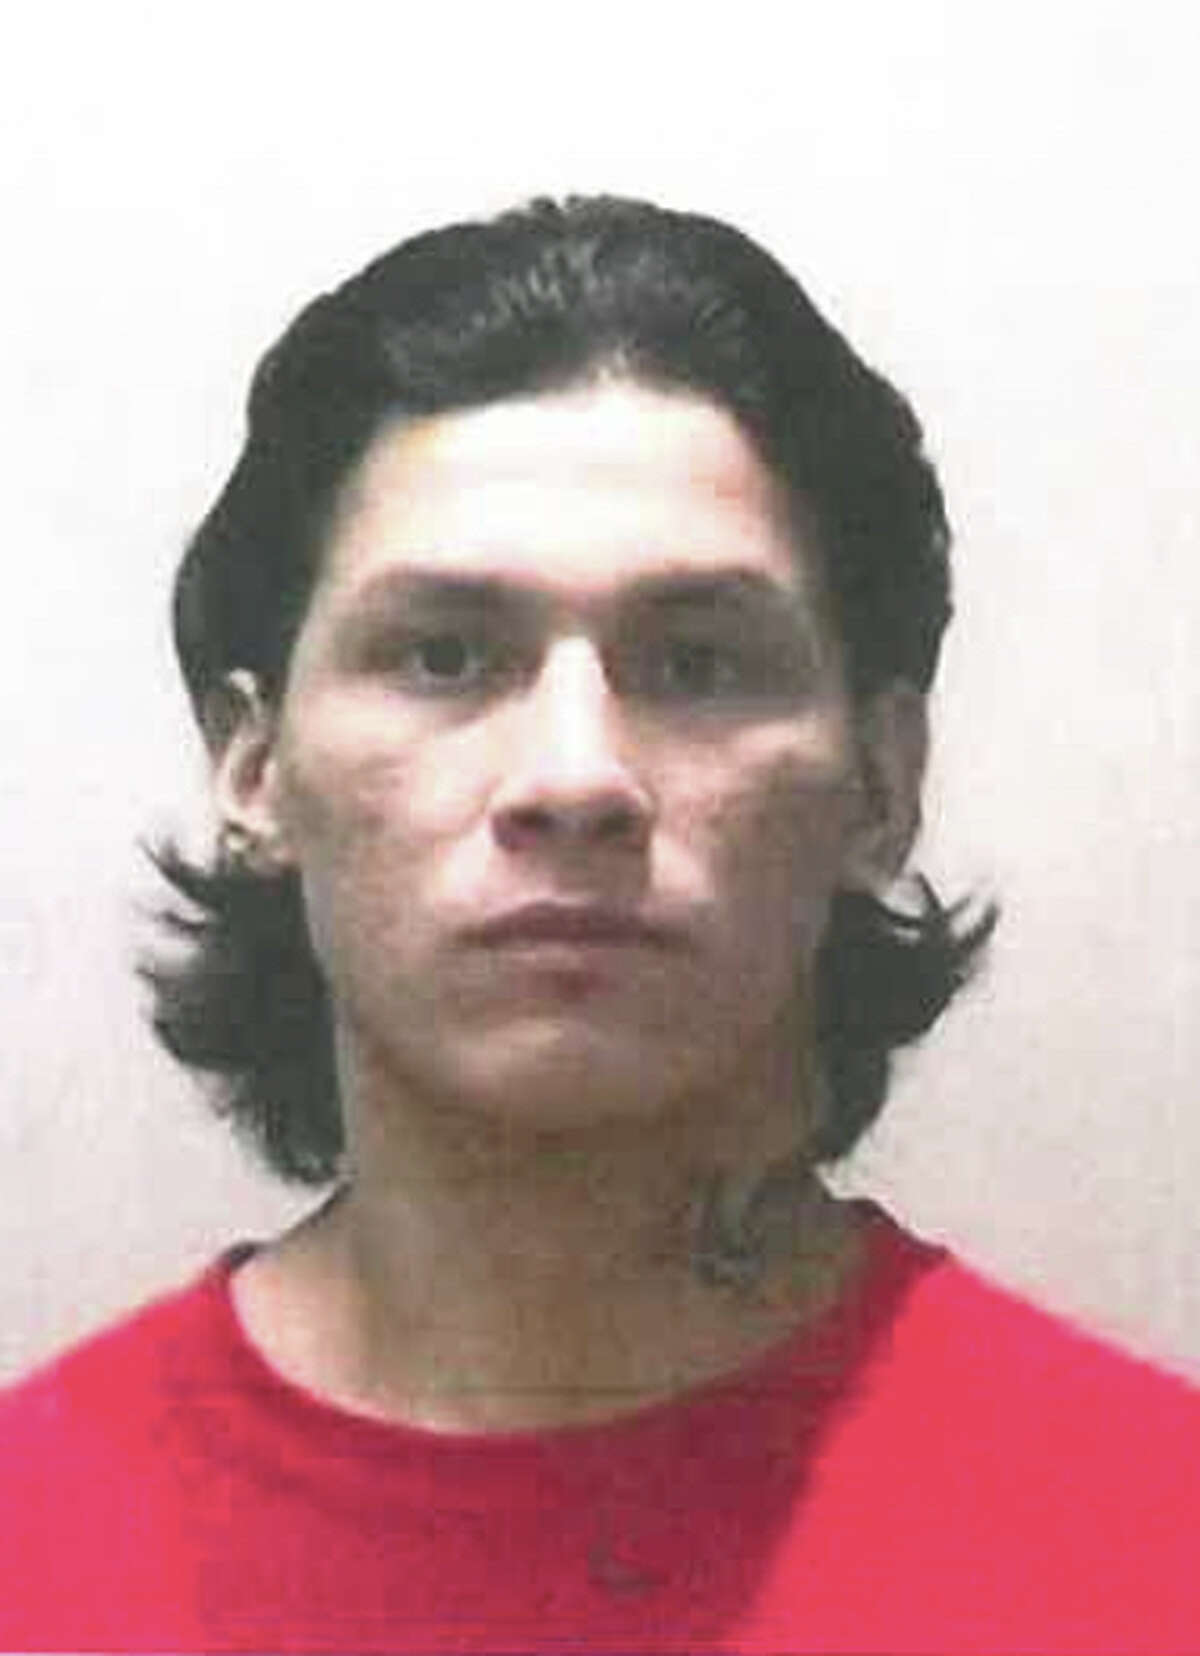 Victor Rodriguez, 20, was mistakenly released Wednesday night from San Francisco County jail due to a court clerk error.